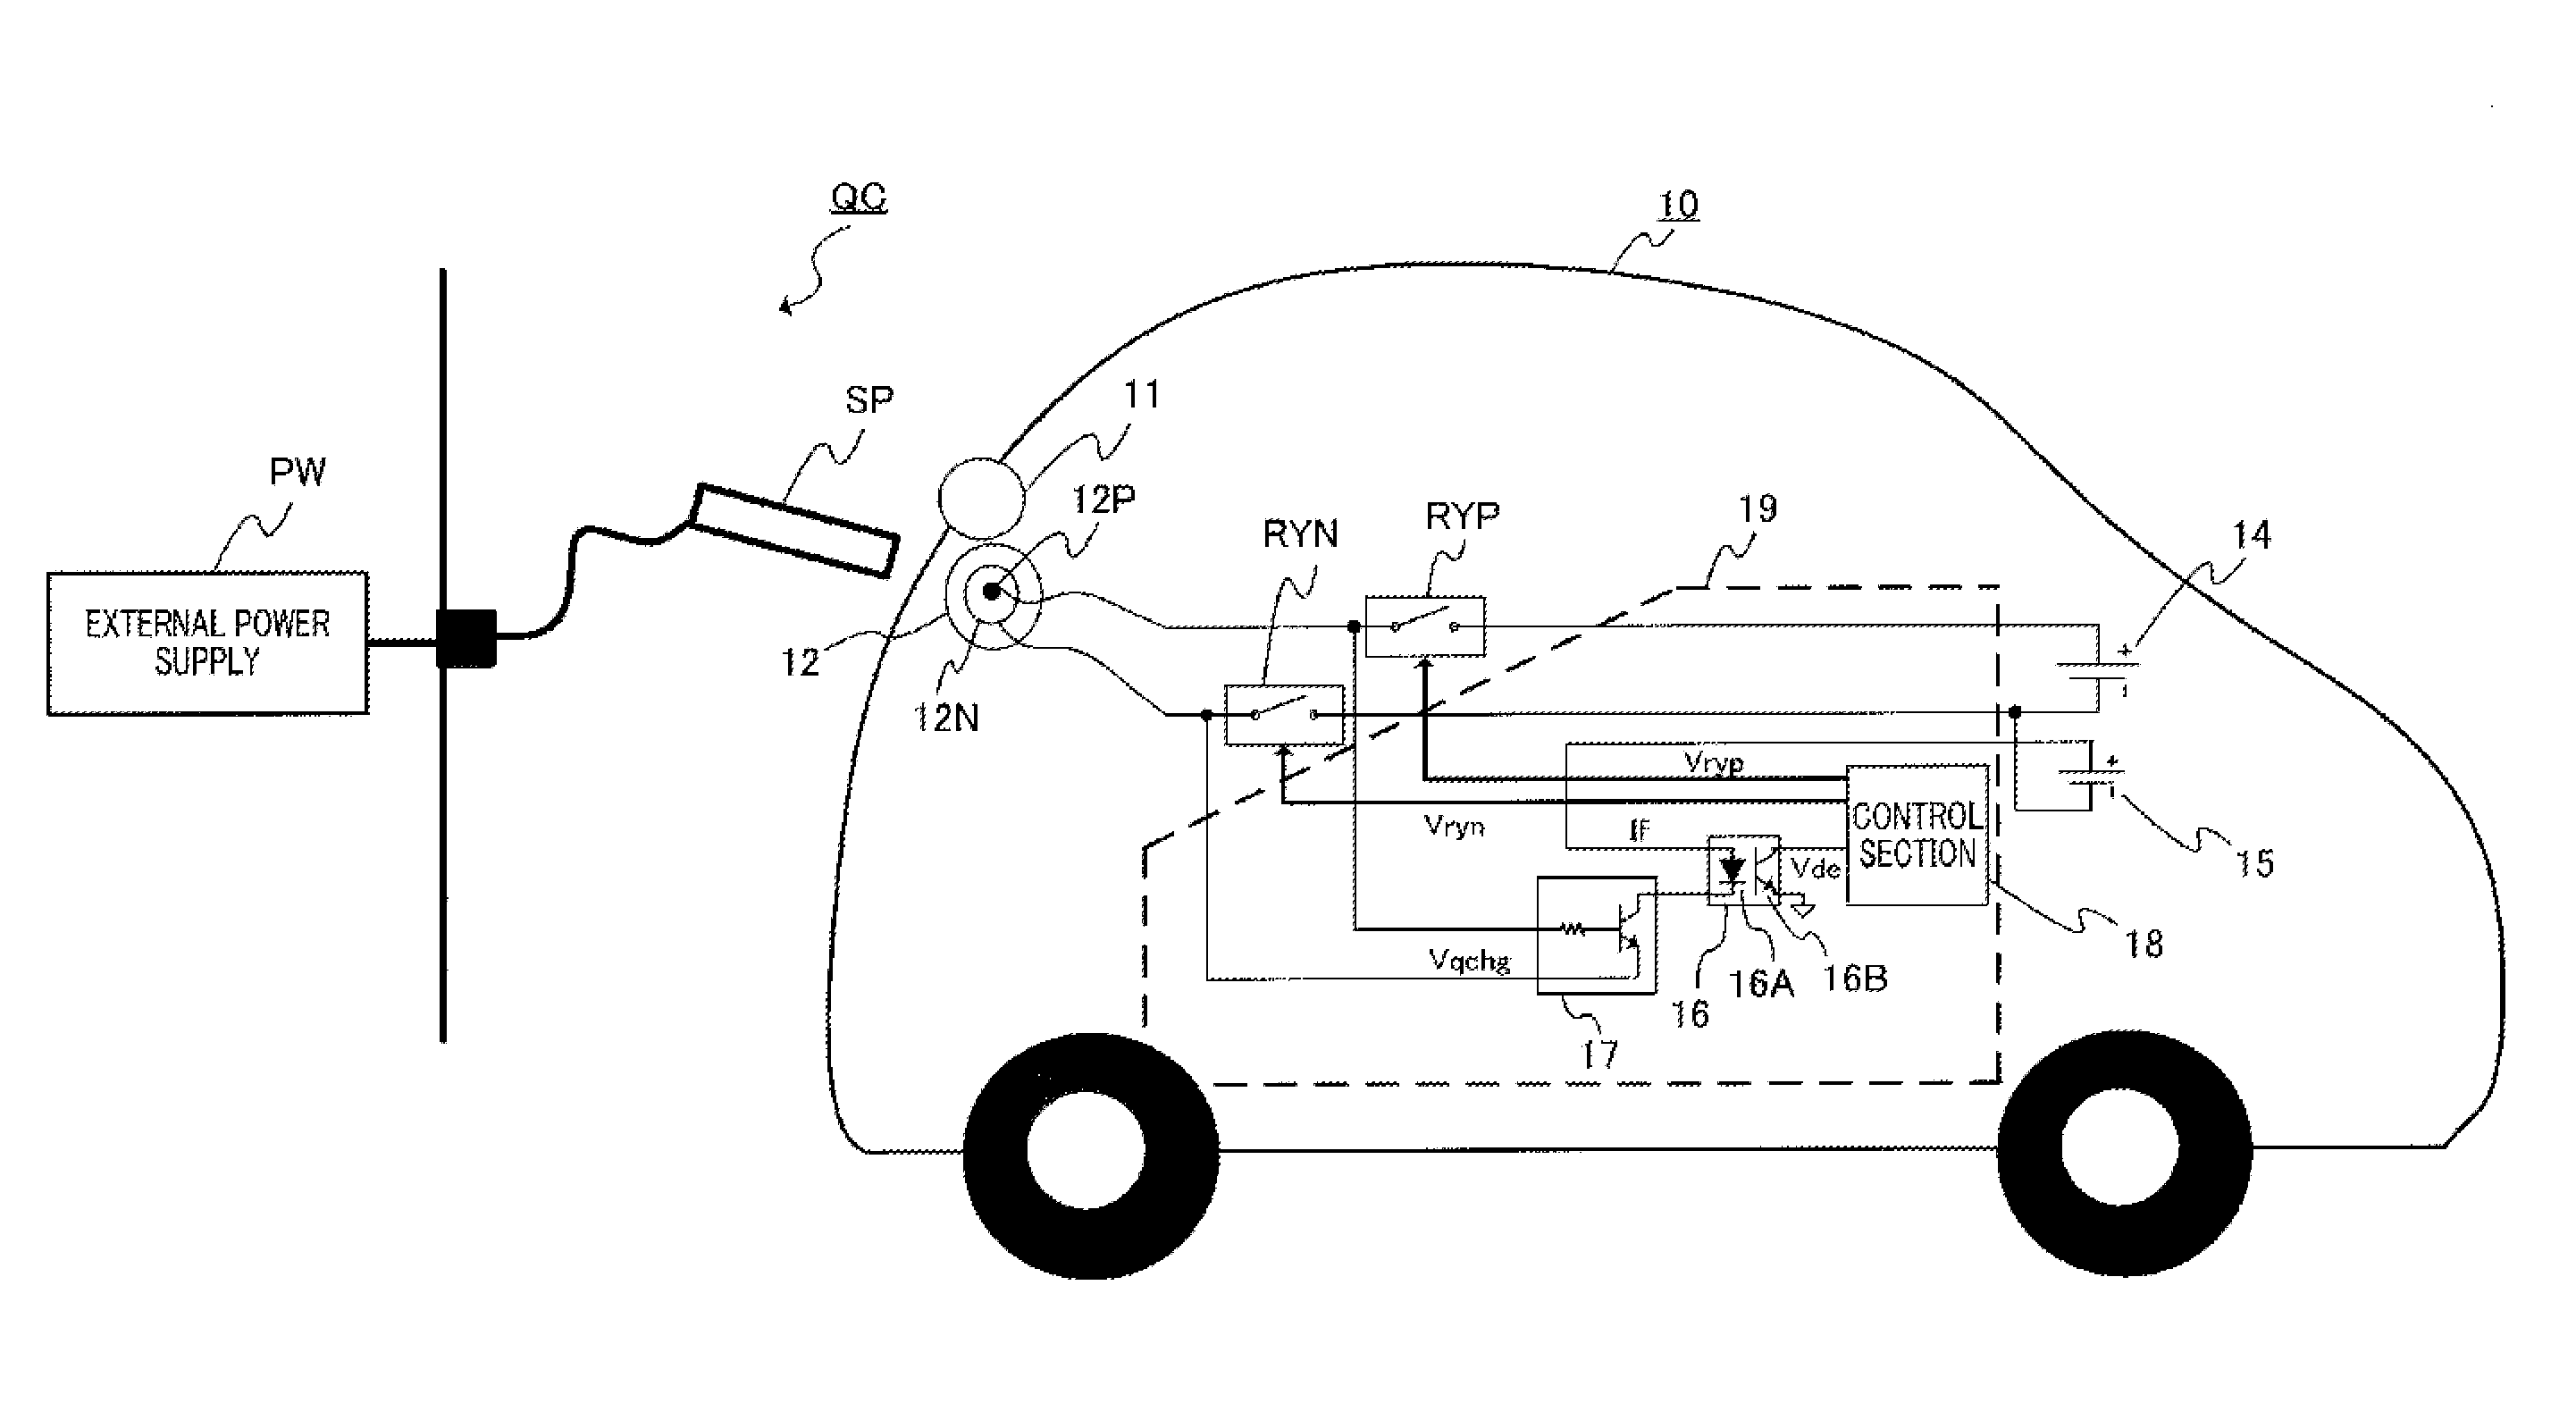 Relay-welding detection circuit and power supplying system